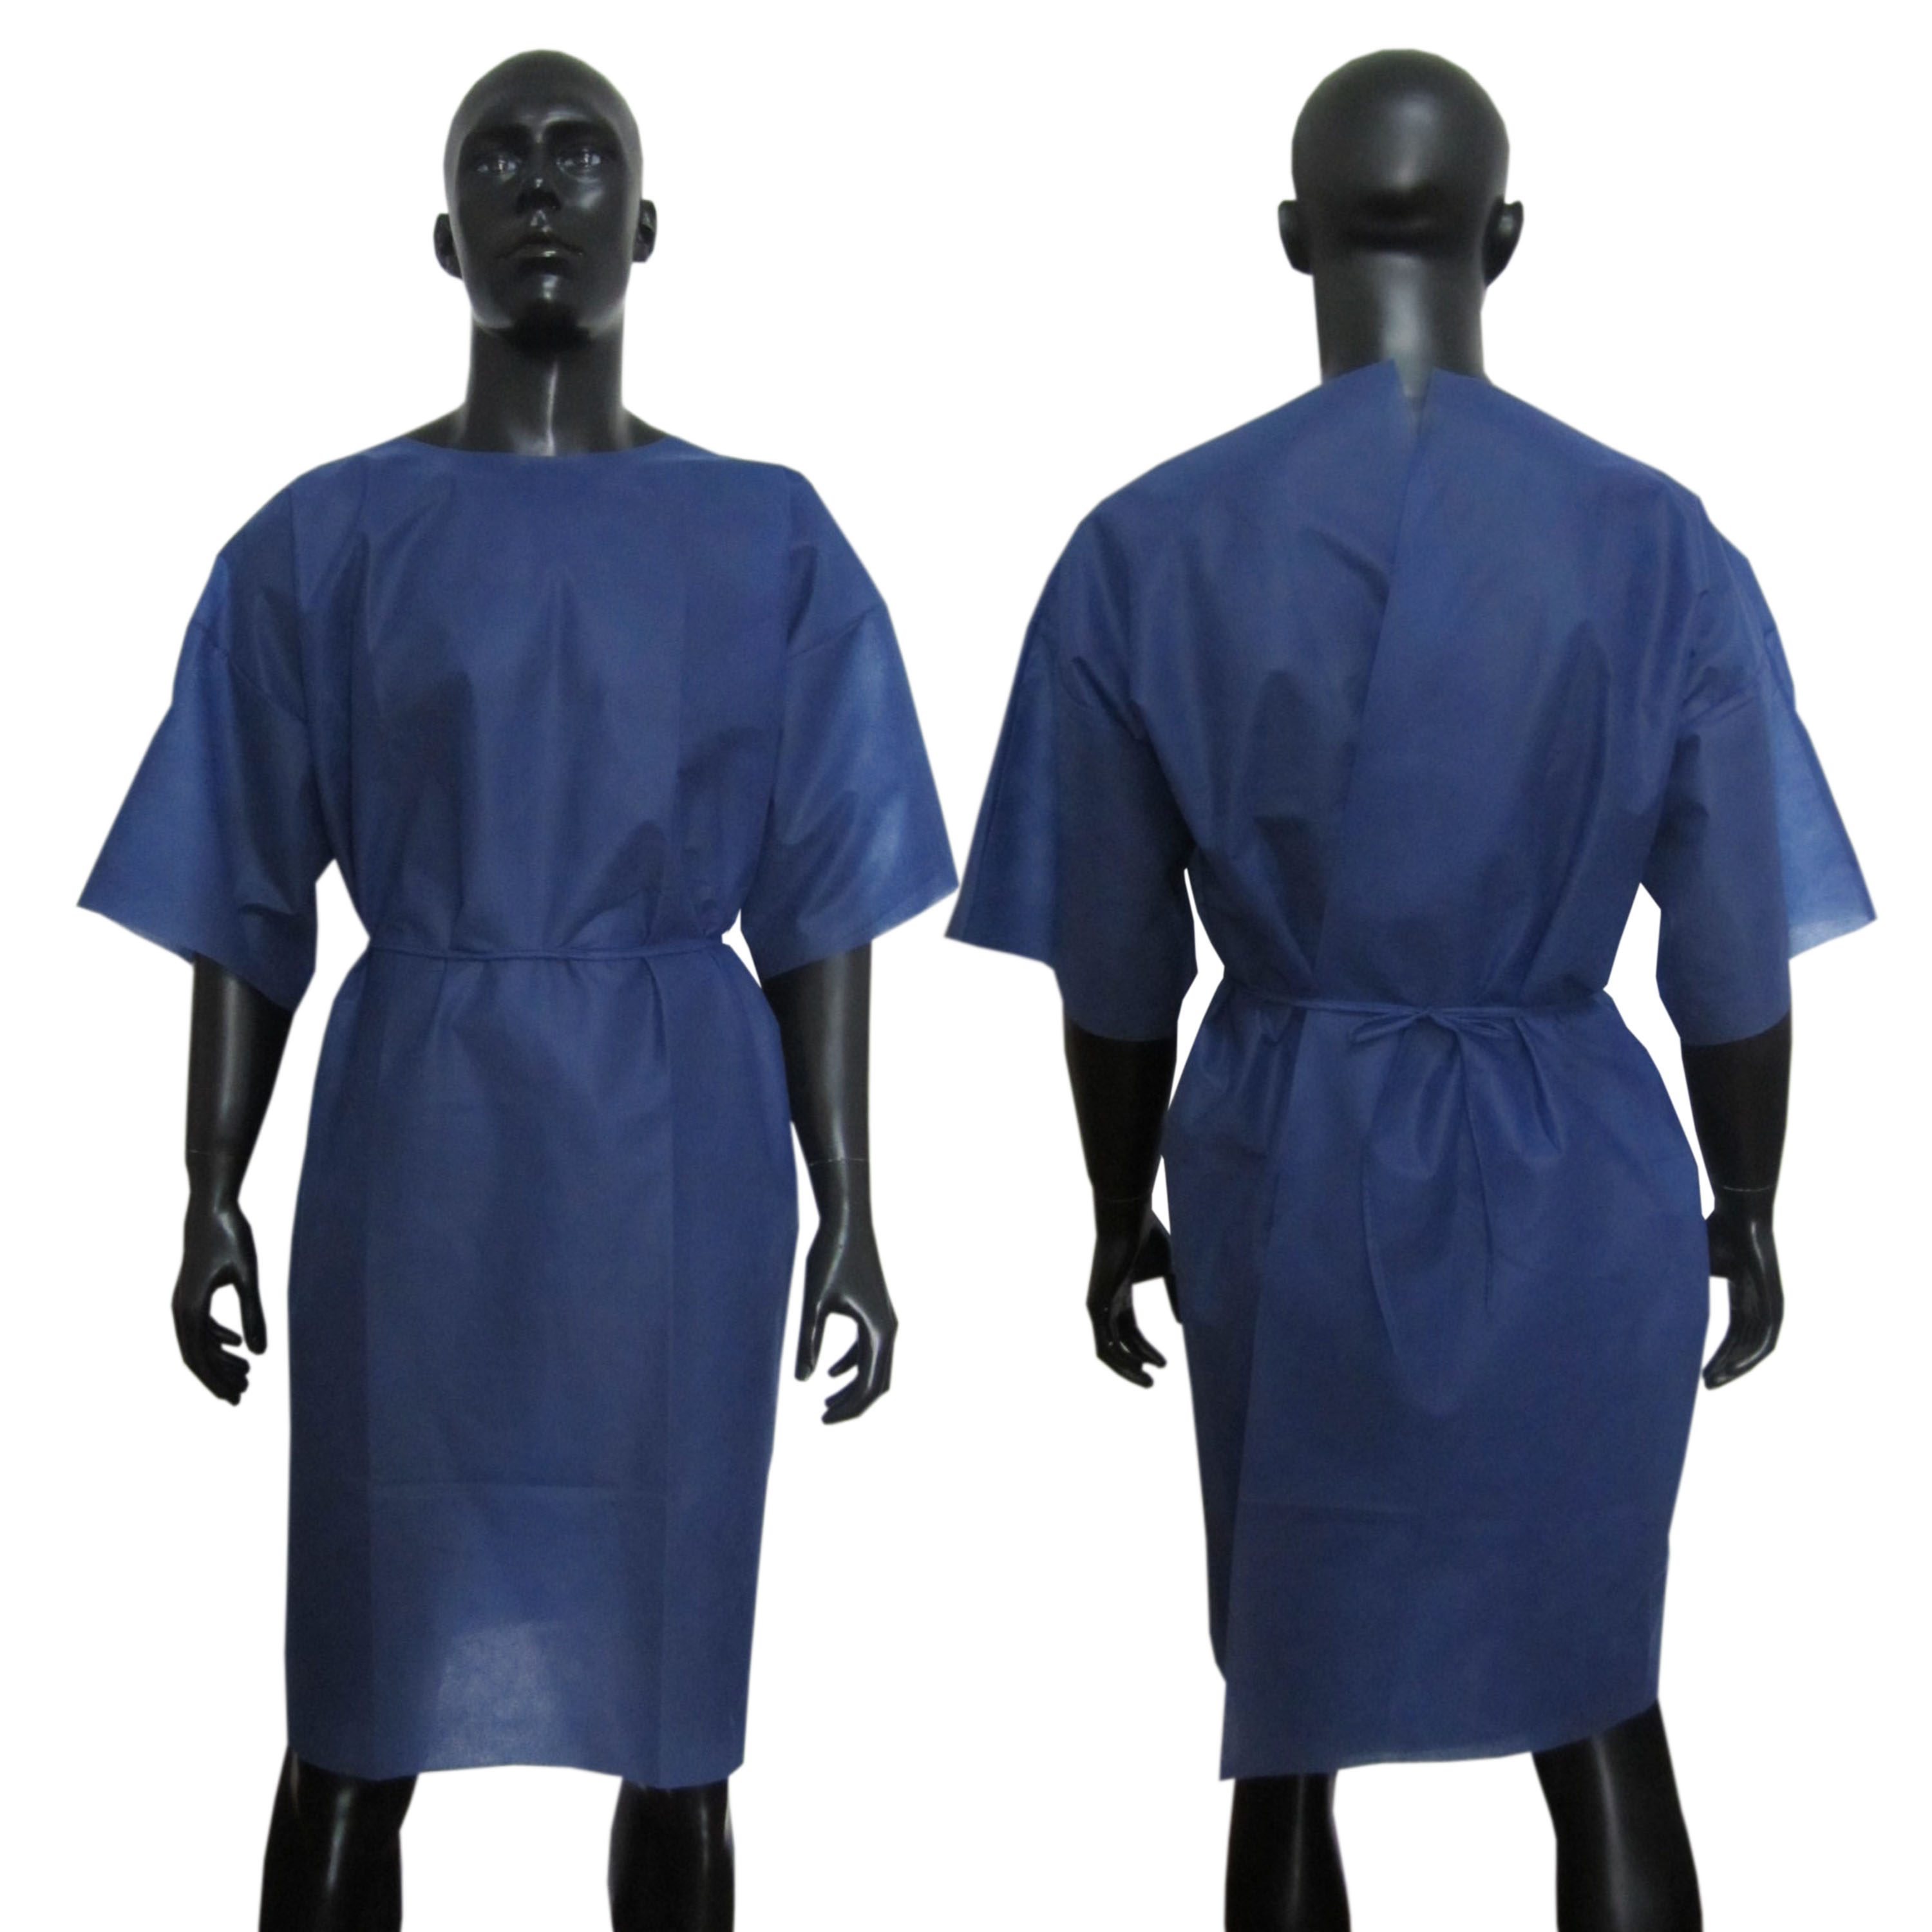 Nonwoven Patient Gown without Sleeves 